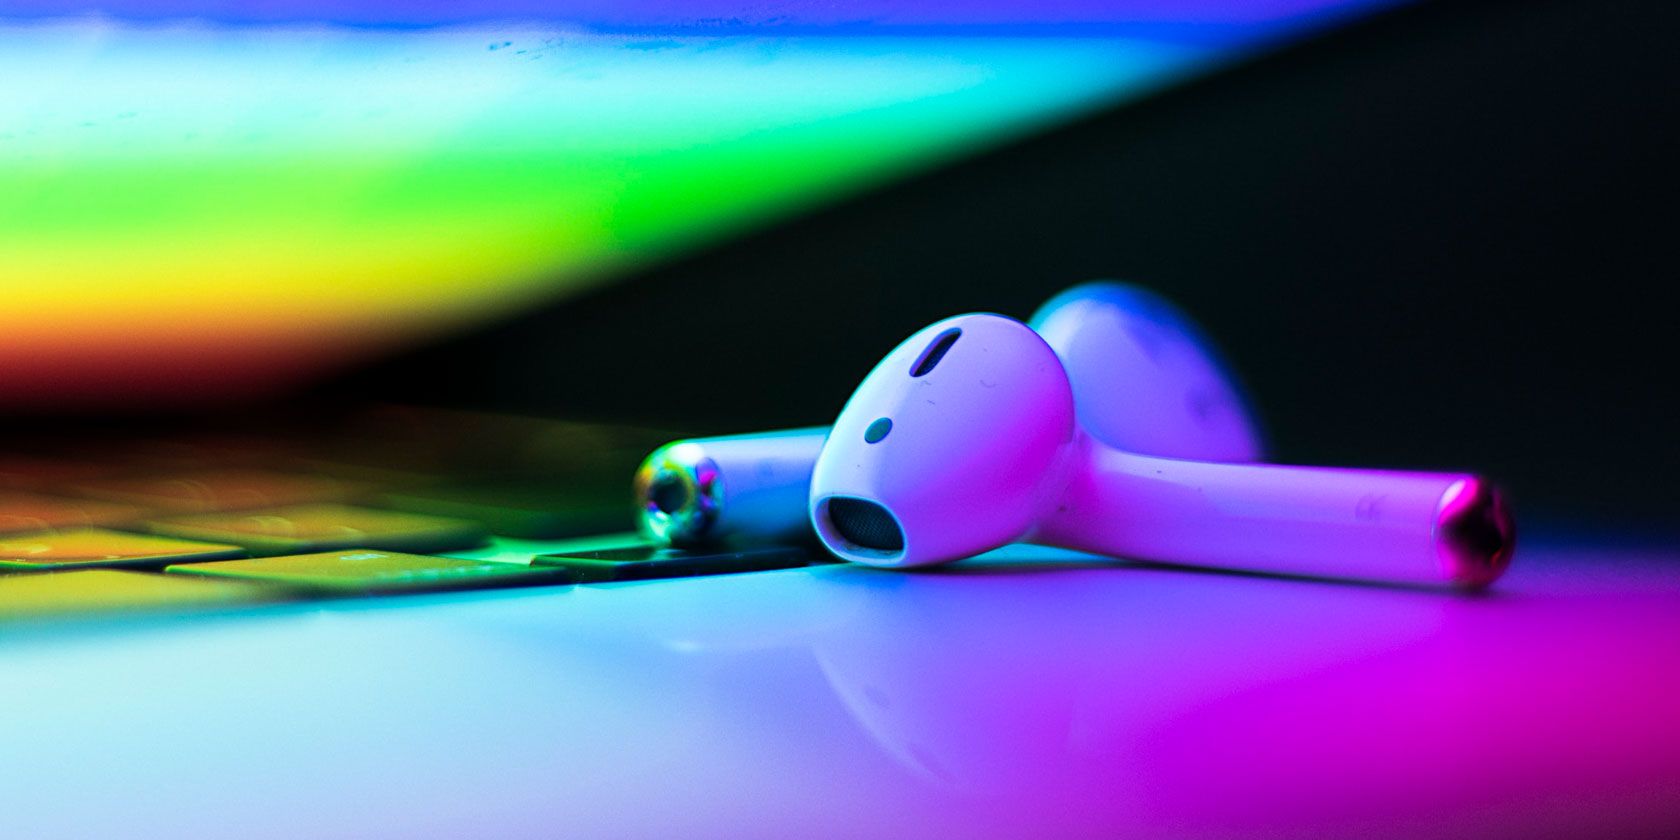 AirPods by a colorful MacBook screen